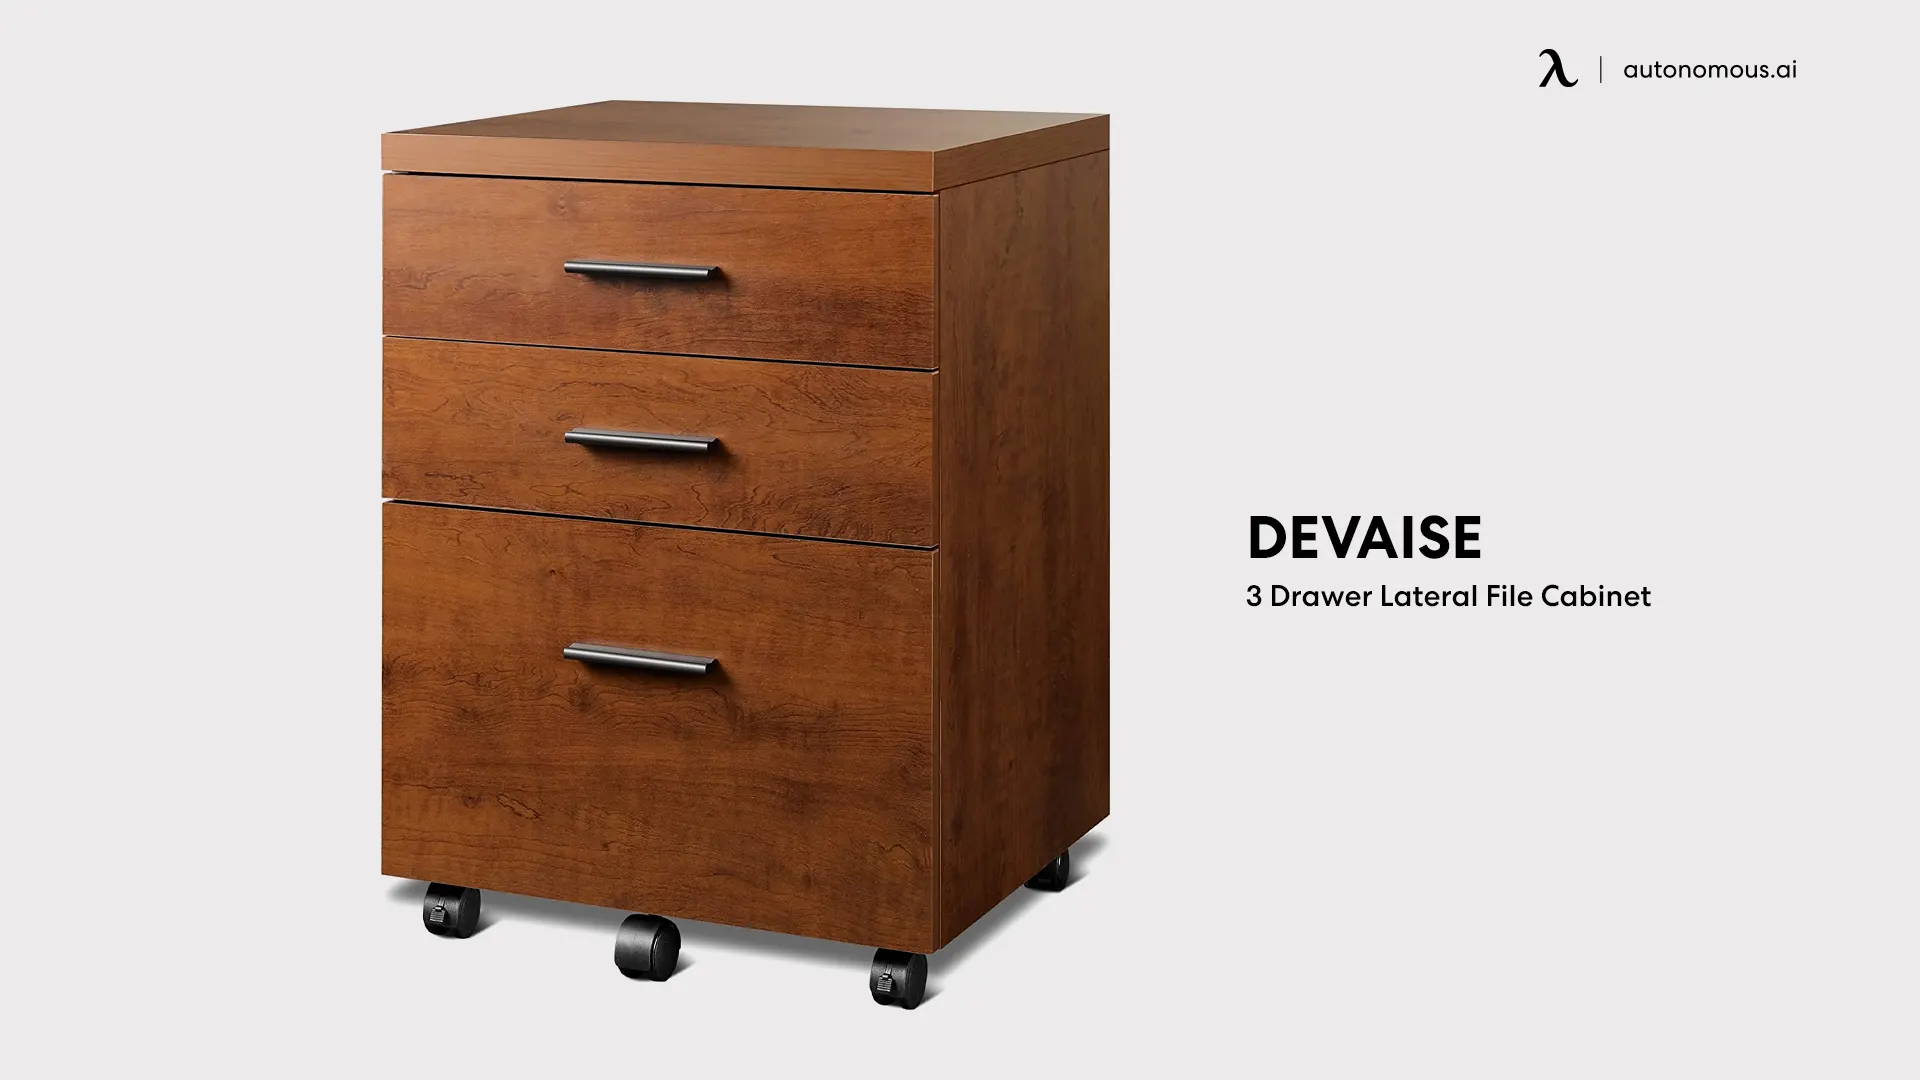 Devaise 3-Drawer Lateral File Cabinet